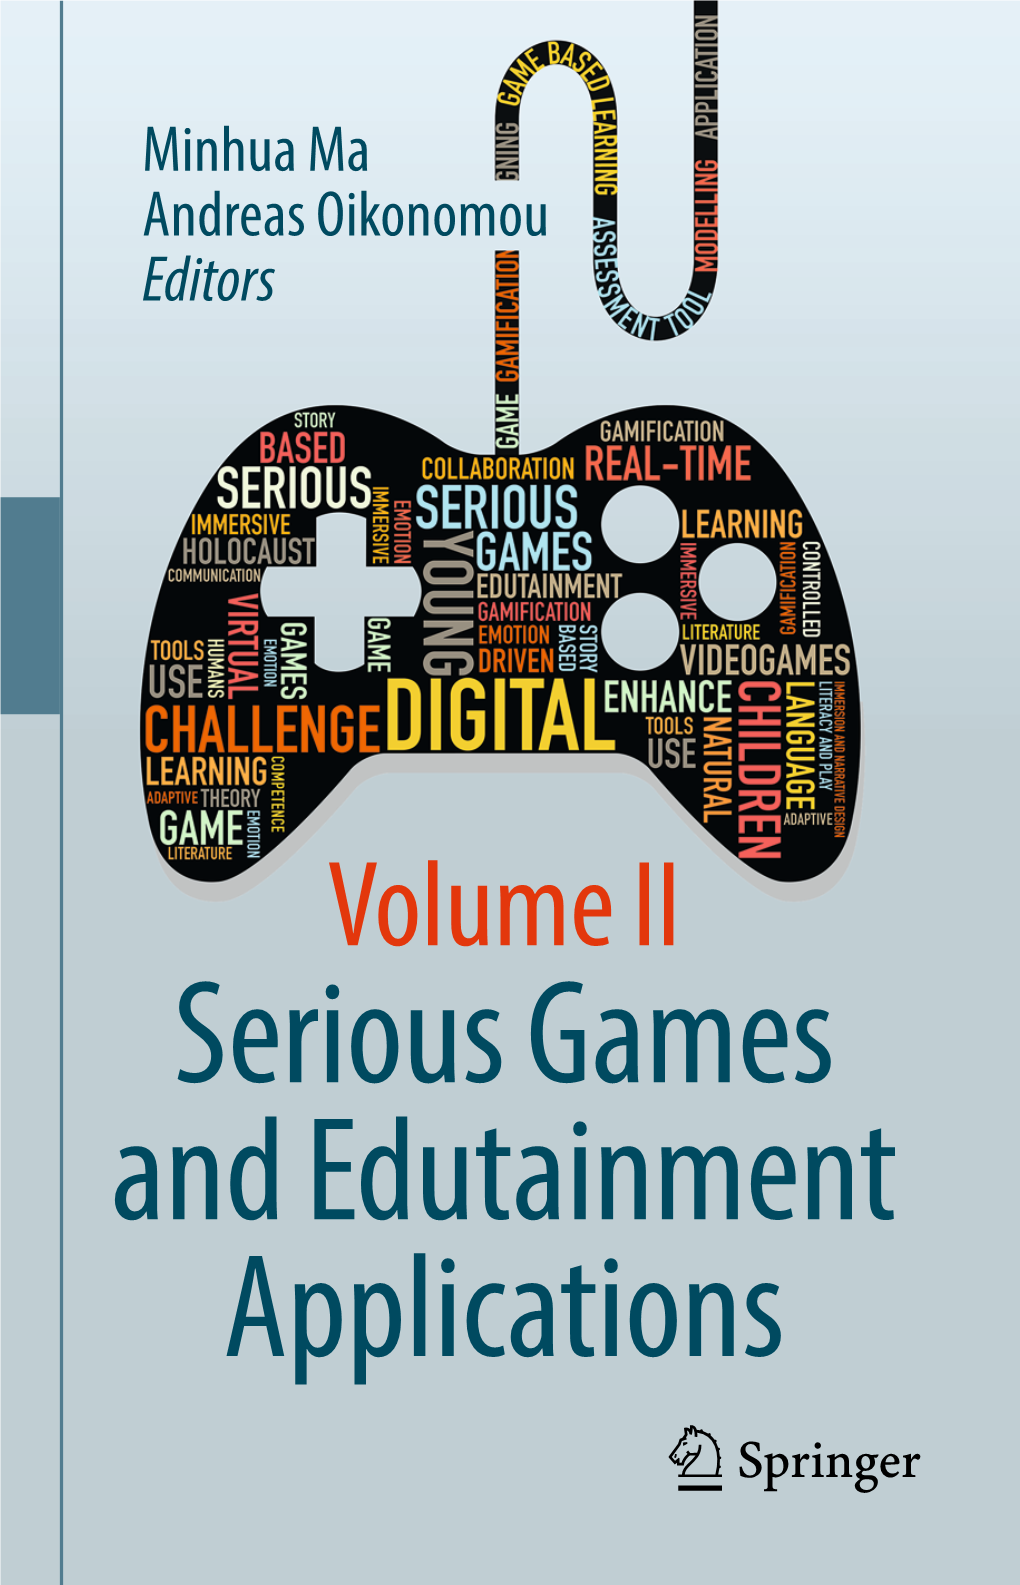 Serious Games and Edutainment Applications Volume II